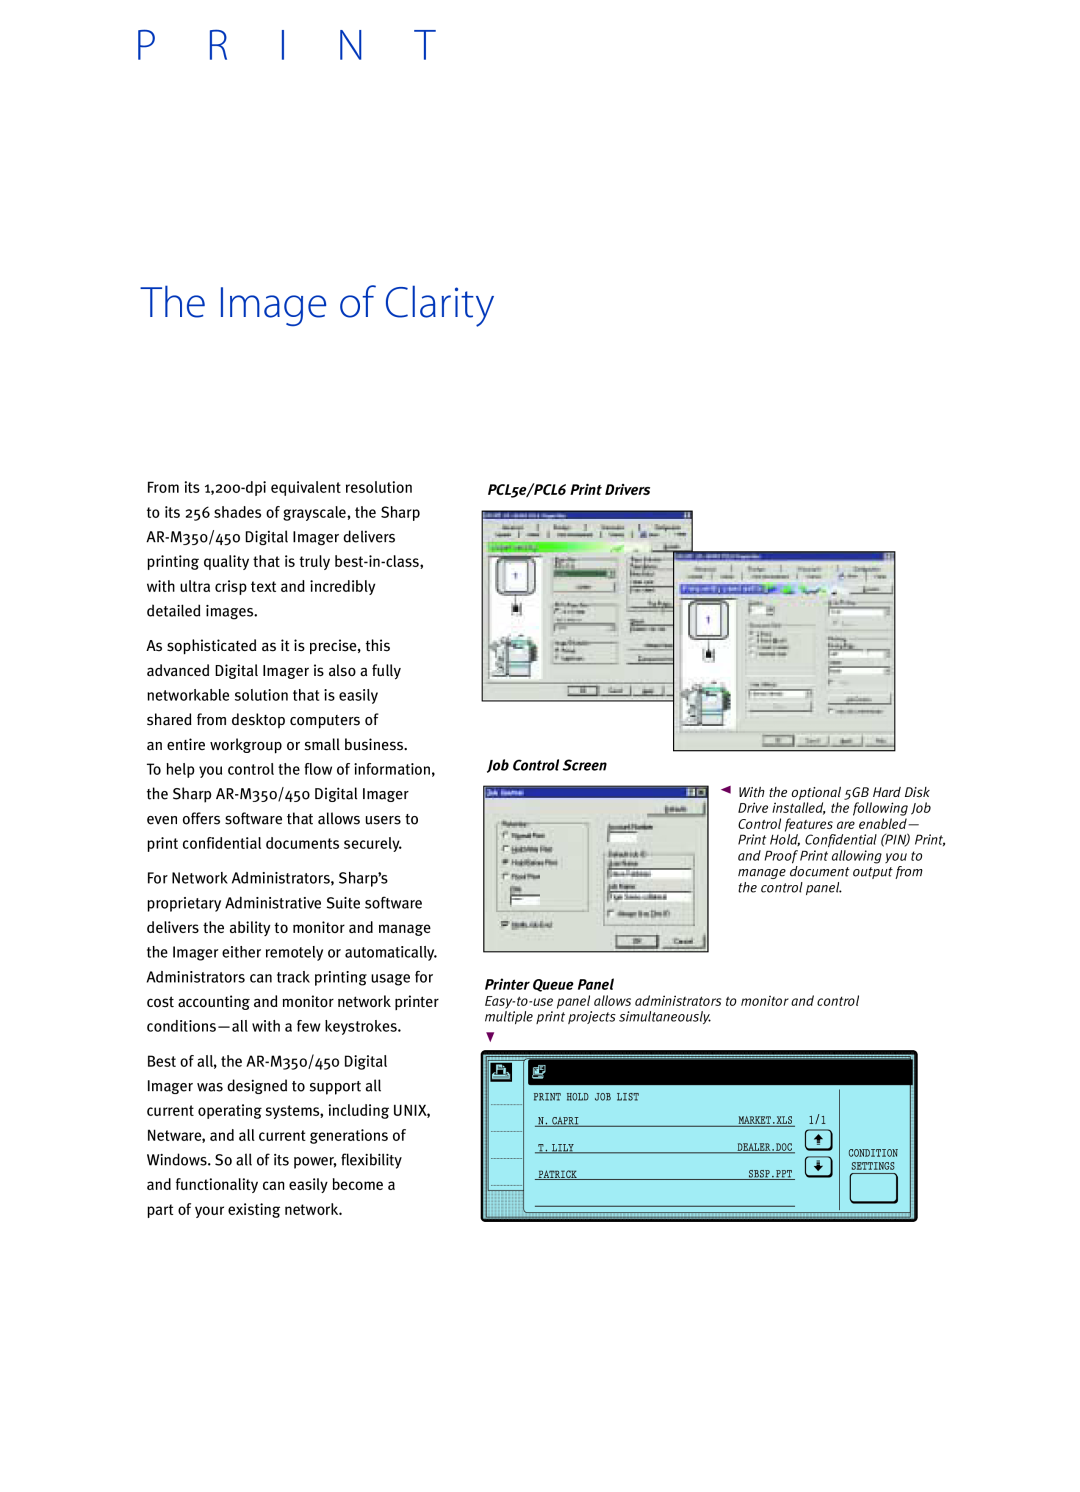 Sharp AR-M450, AR-M350 P R I N T The Image of Clarity, To help you control the flow of information, Printer Queue Panel 